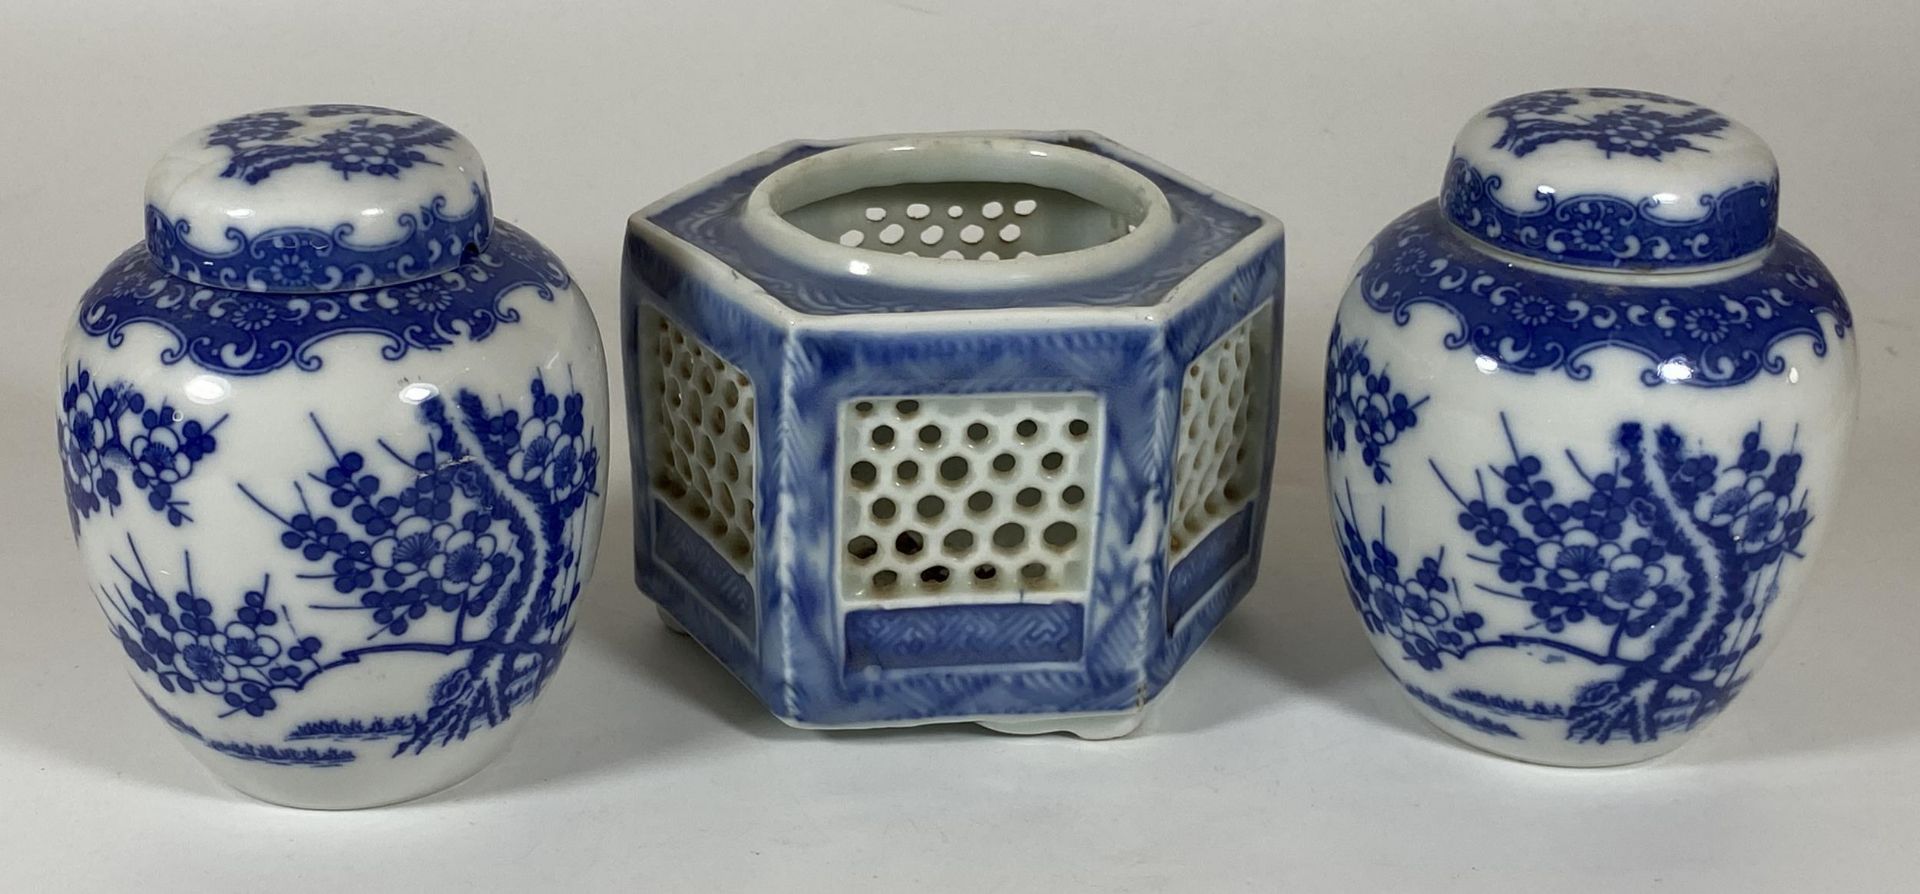 THREE ITEMS - A PAIR OF JAPANESE BLUE AND WHITE FLORAL GINGER JARS AND A RETICULATED POT, HEIGHT